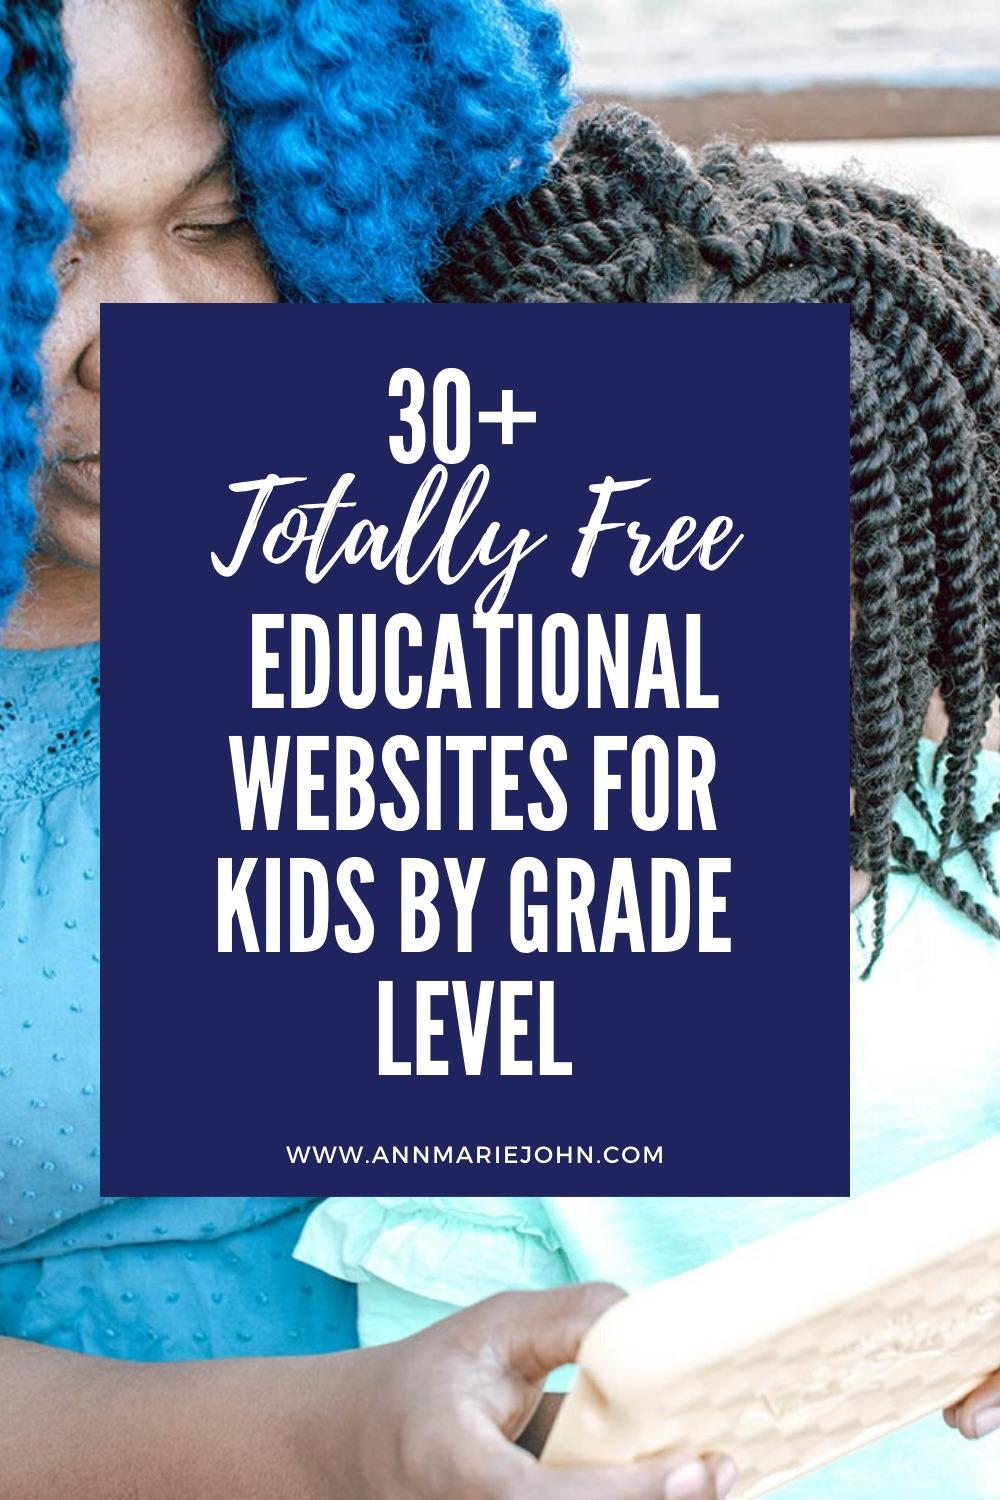 30+ Totally Free Educational Websites for Kids by Grade Level